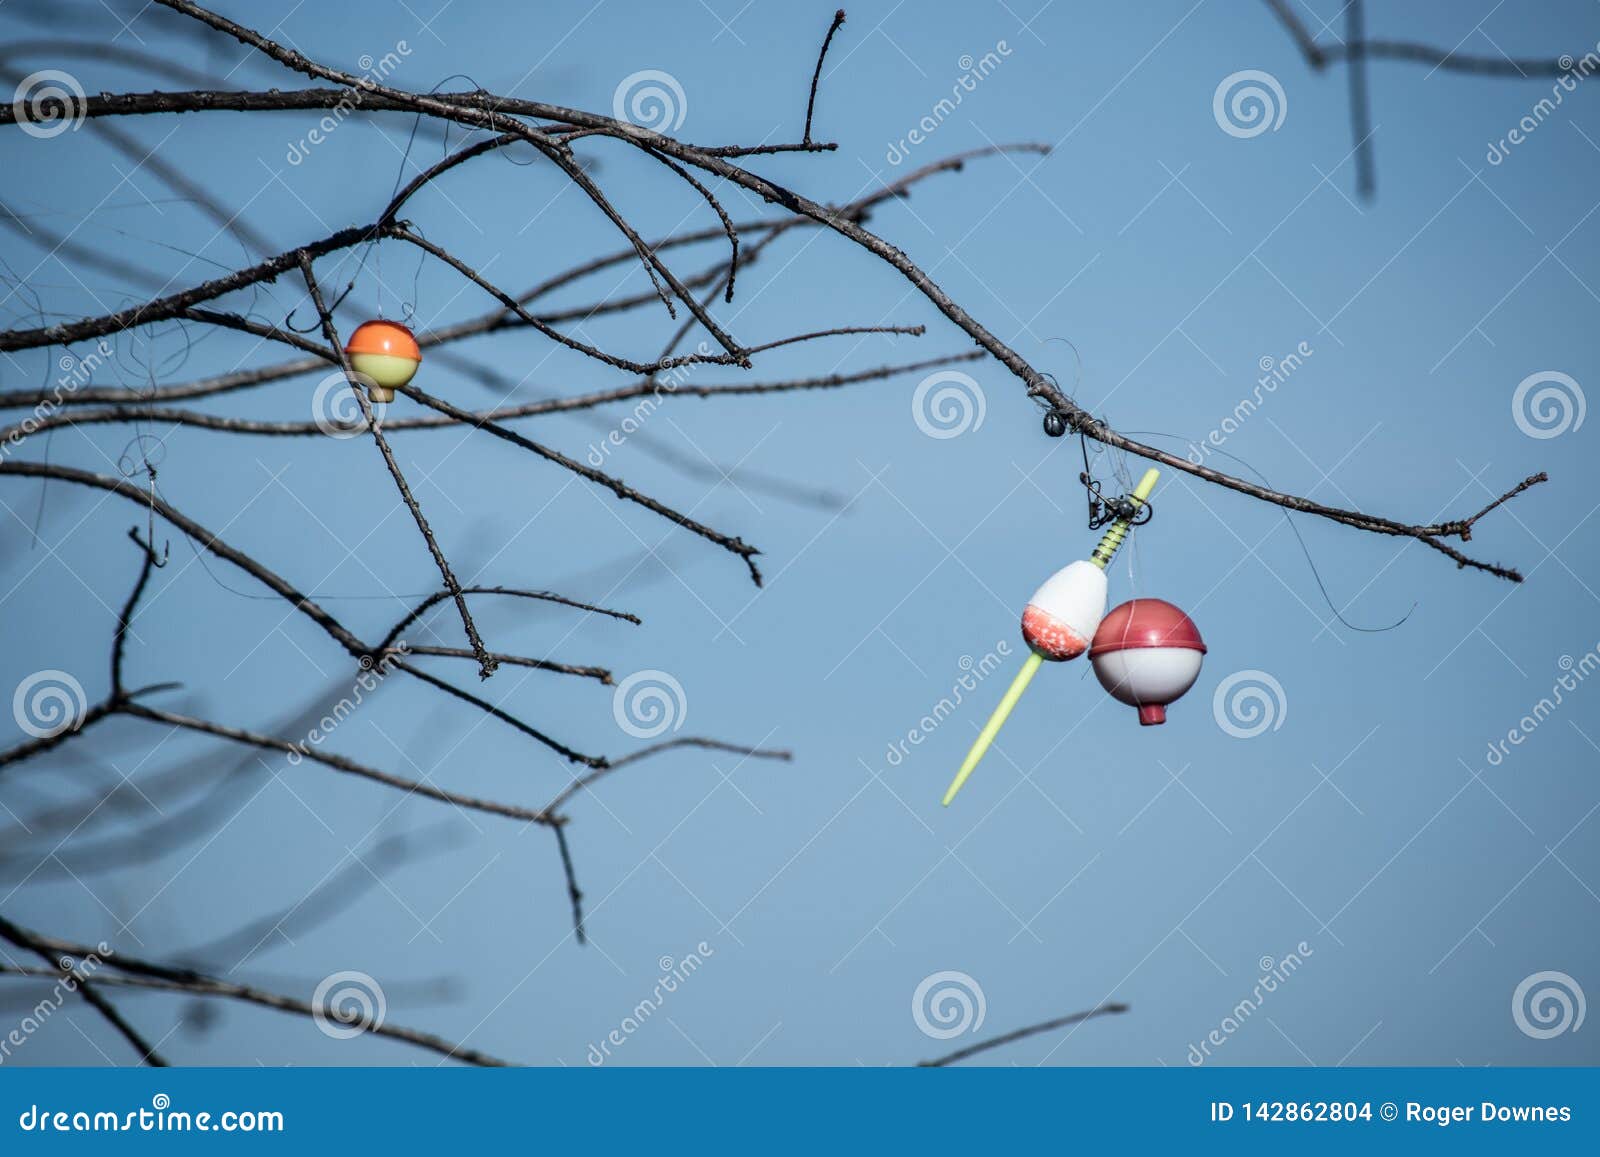 Fishing Bobbers Caught in a Tree Stock Photo - Image of tree, hooks:  142862804